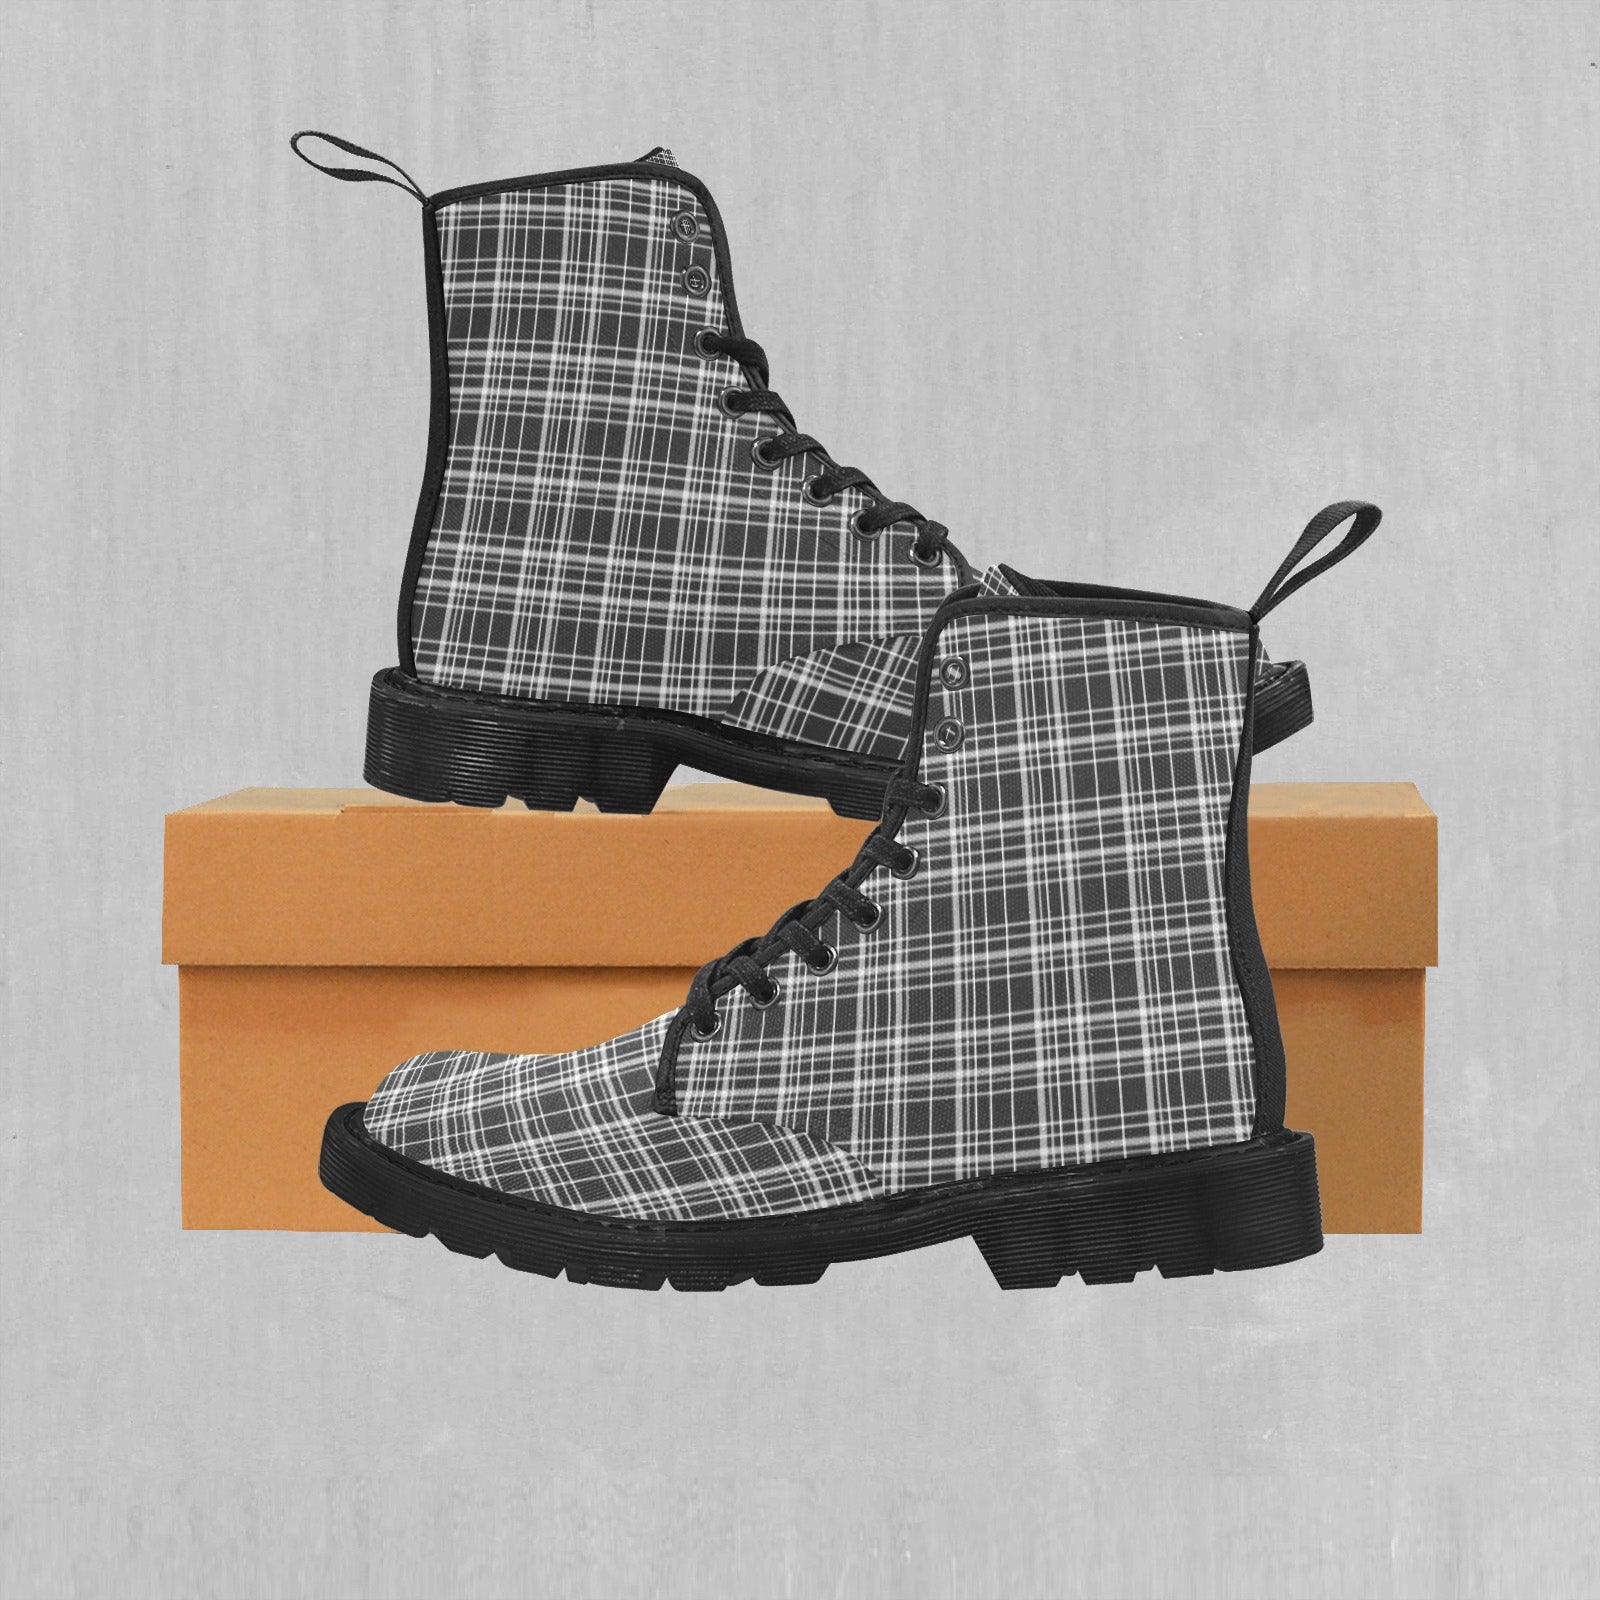 Grayscale Plaid Women's Boots